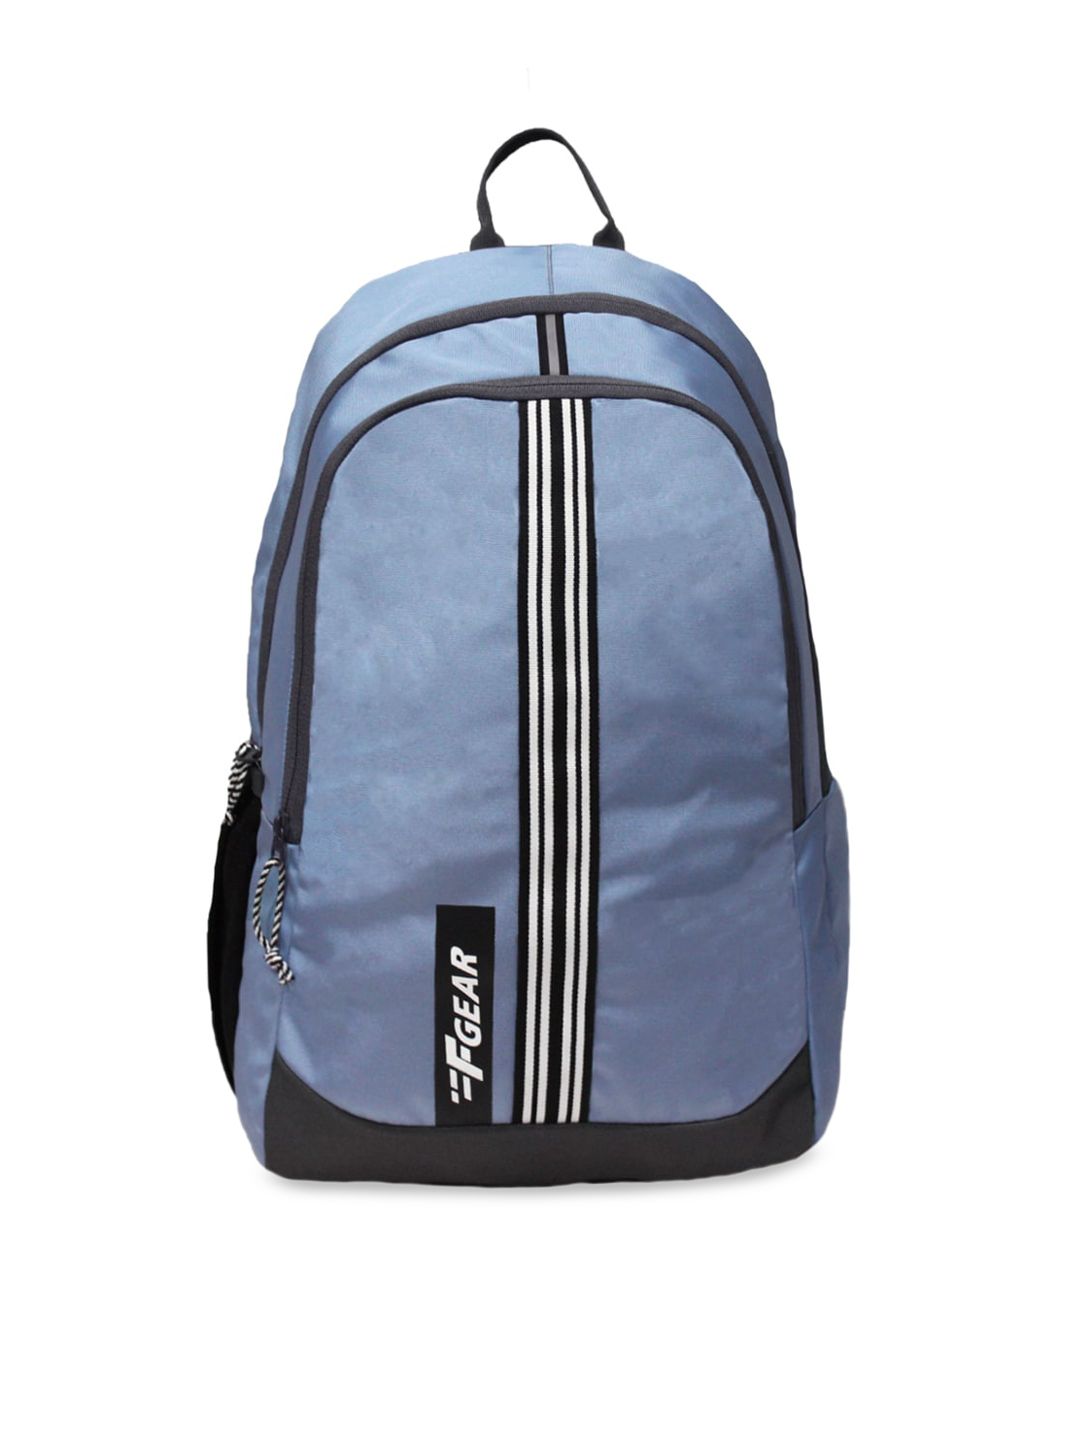 F Gear Unisex Blue & Black Contrast Detail Backpack Price in India